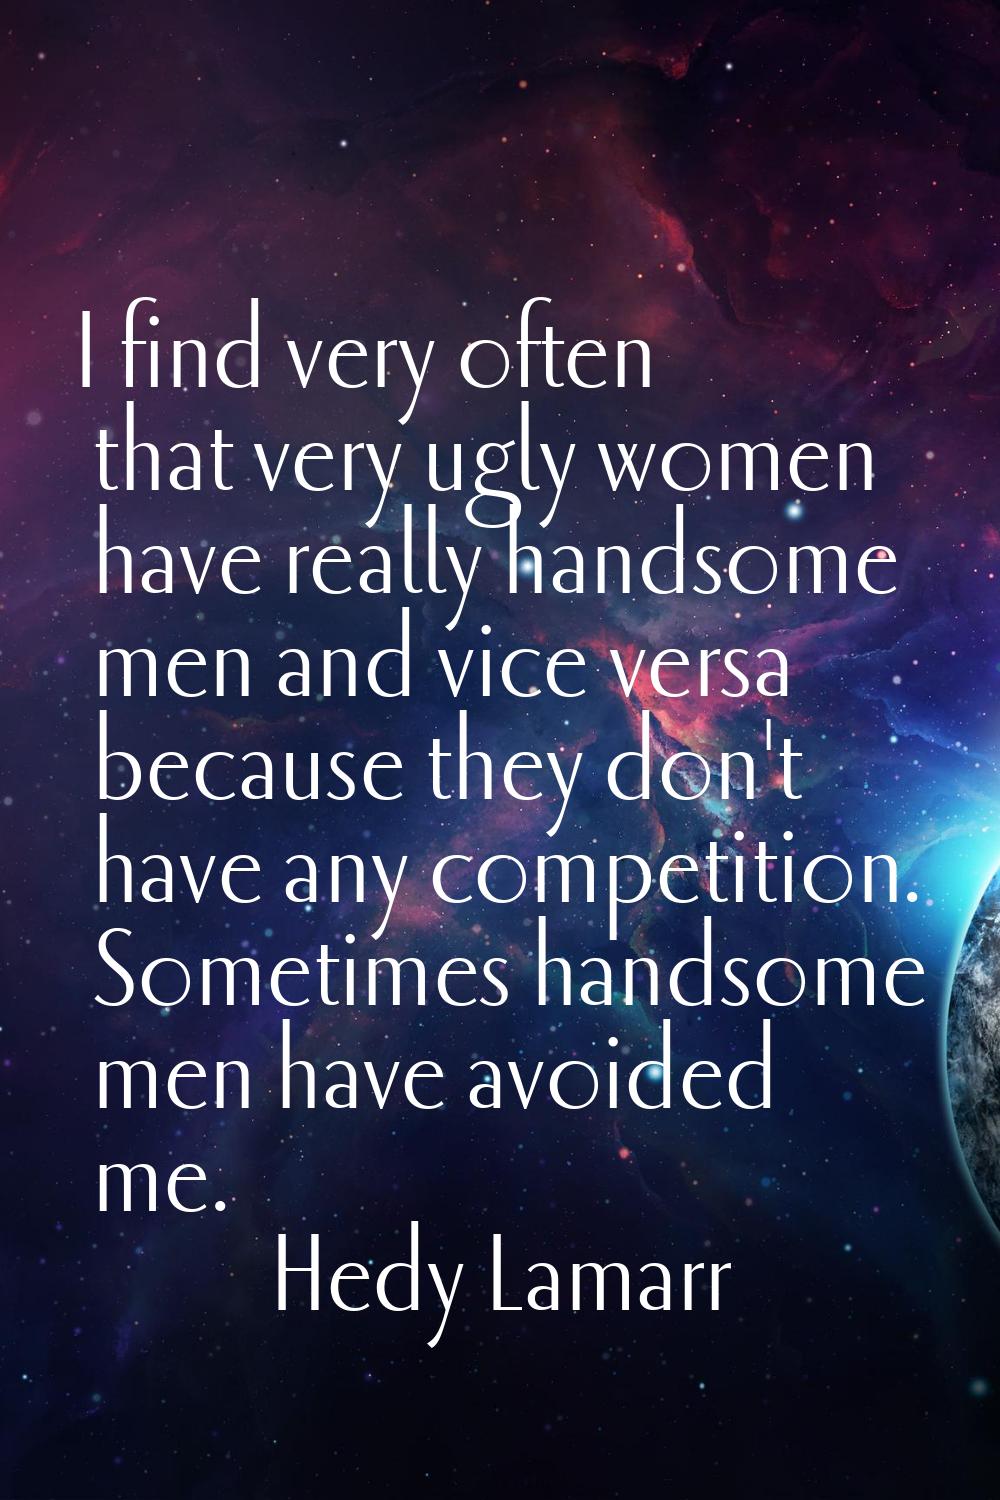 I find very often that very ugly women have really handsome men and vice versa because they don't h